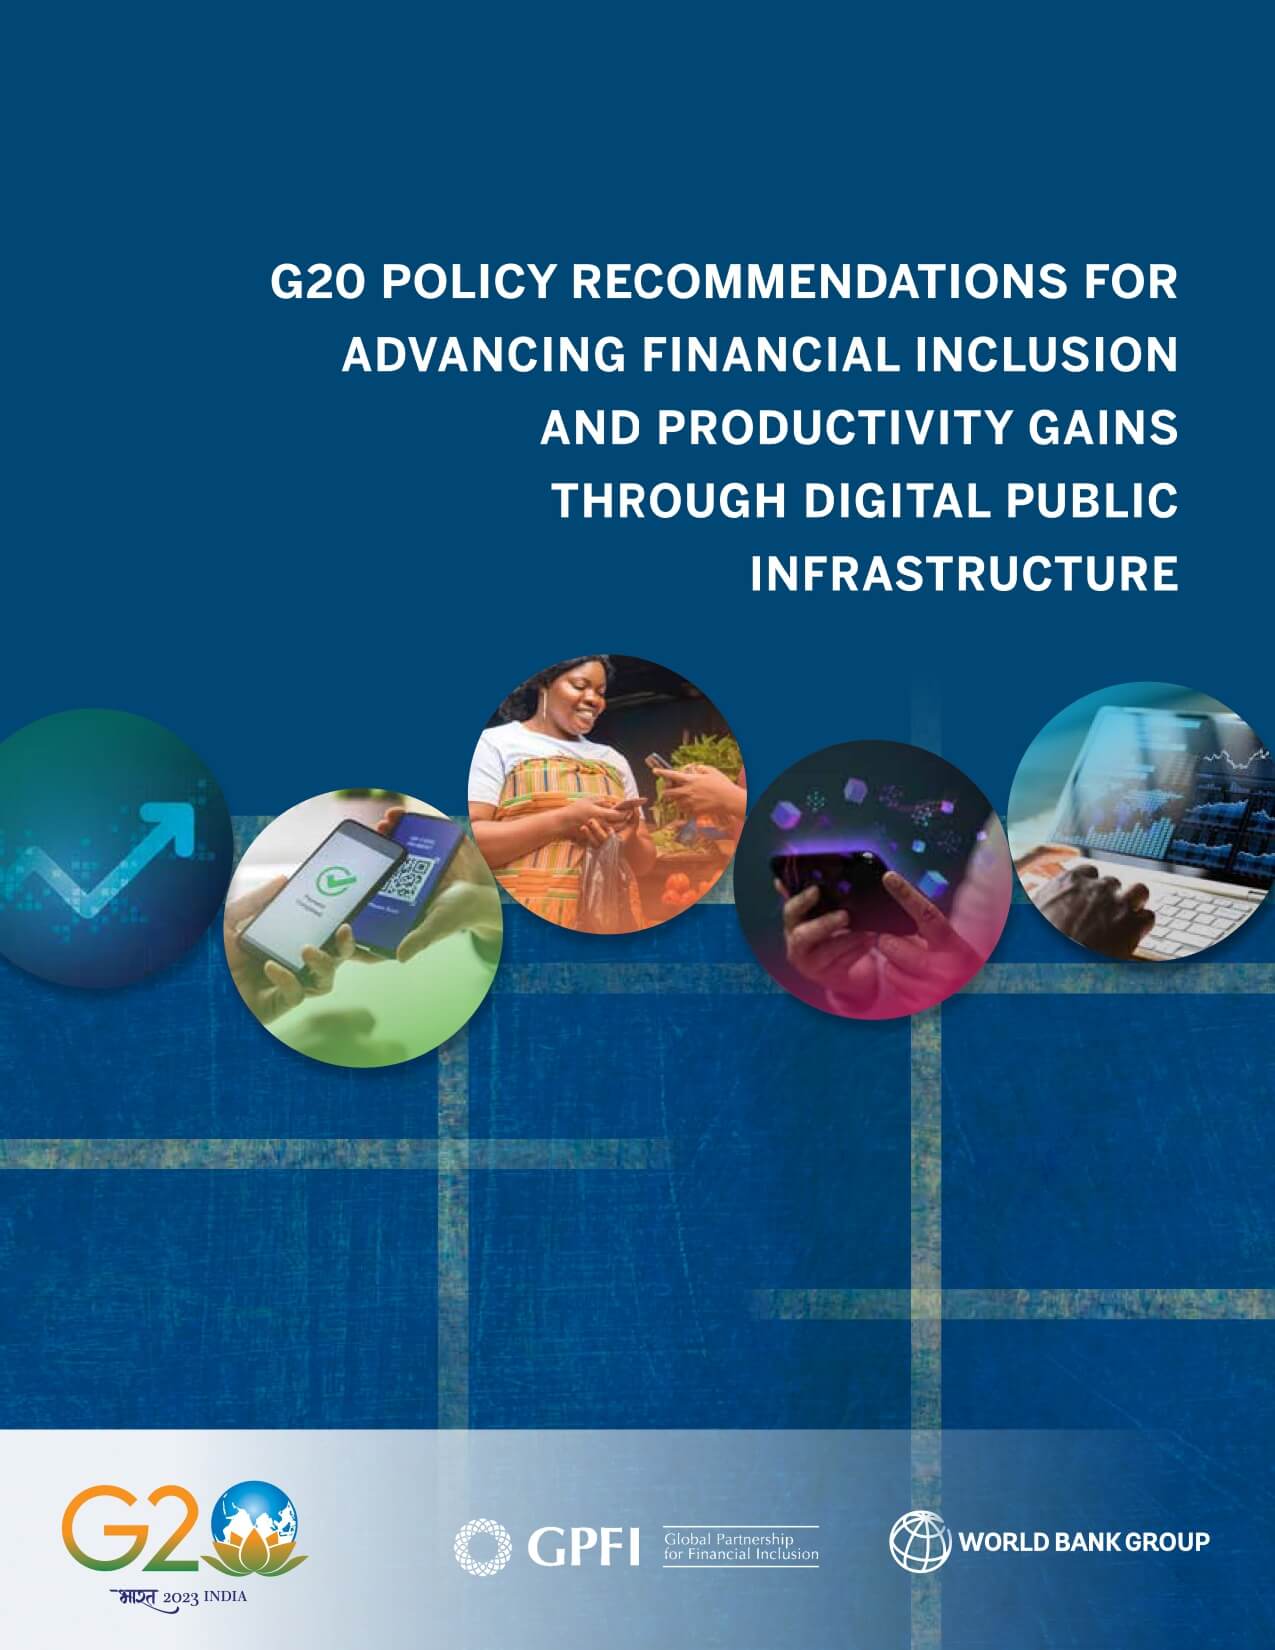 The G20 Global Partnership for Financial Inclusion report authored by the World Bank.
Source: https://www.g20.org/content/dam/gtwenty/gtwenty_new/document/G20_POLICY_RECOMMENDATIONS.pdf